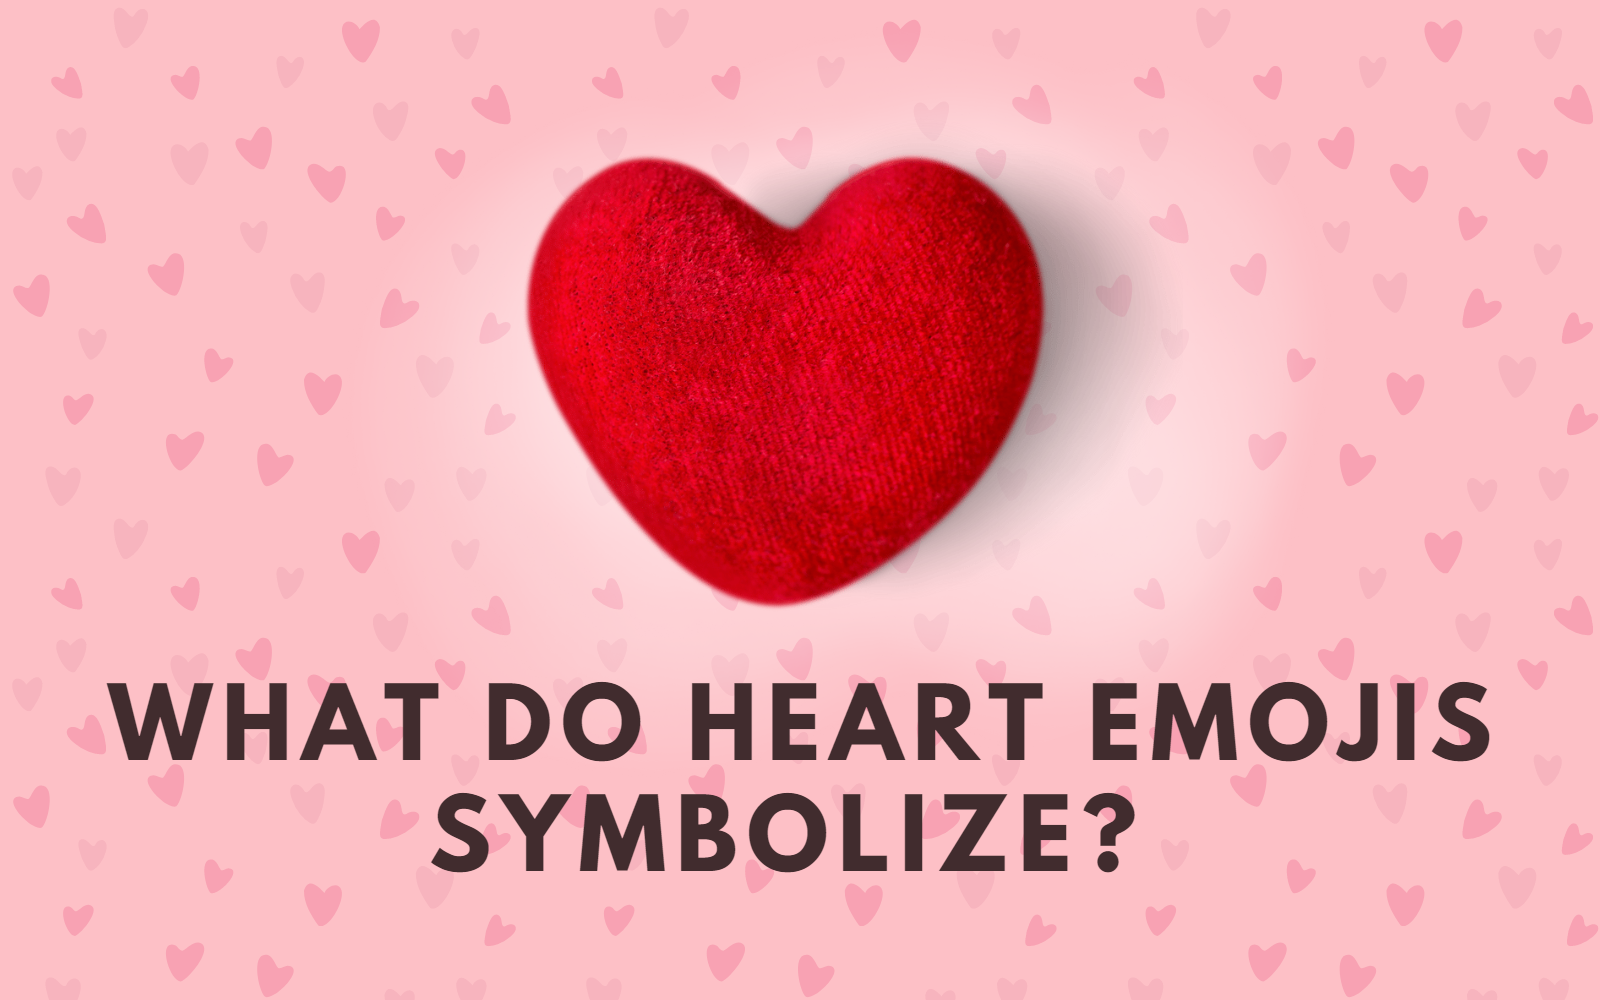 emoji heart color meaning